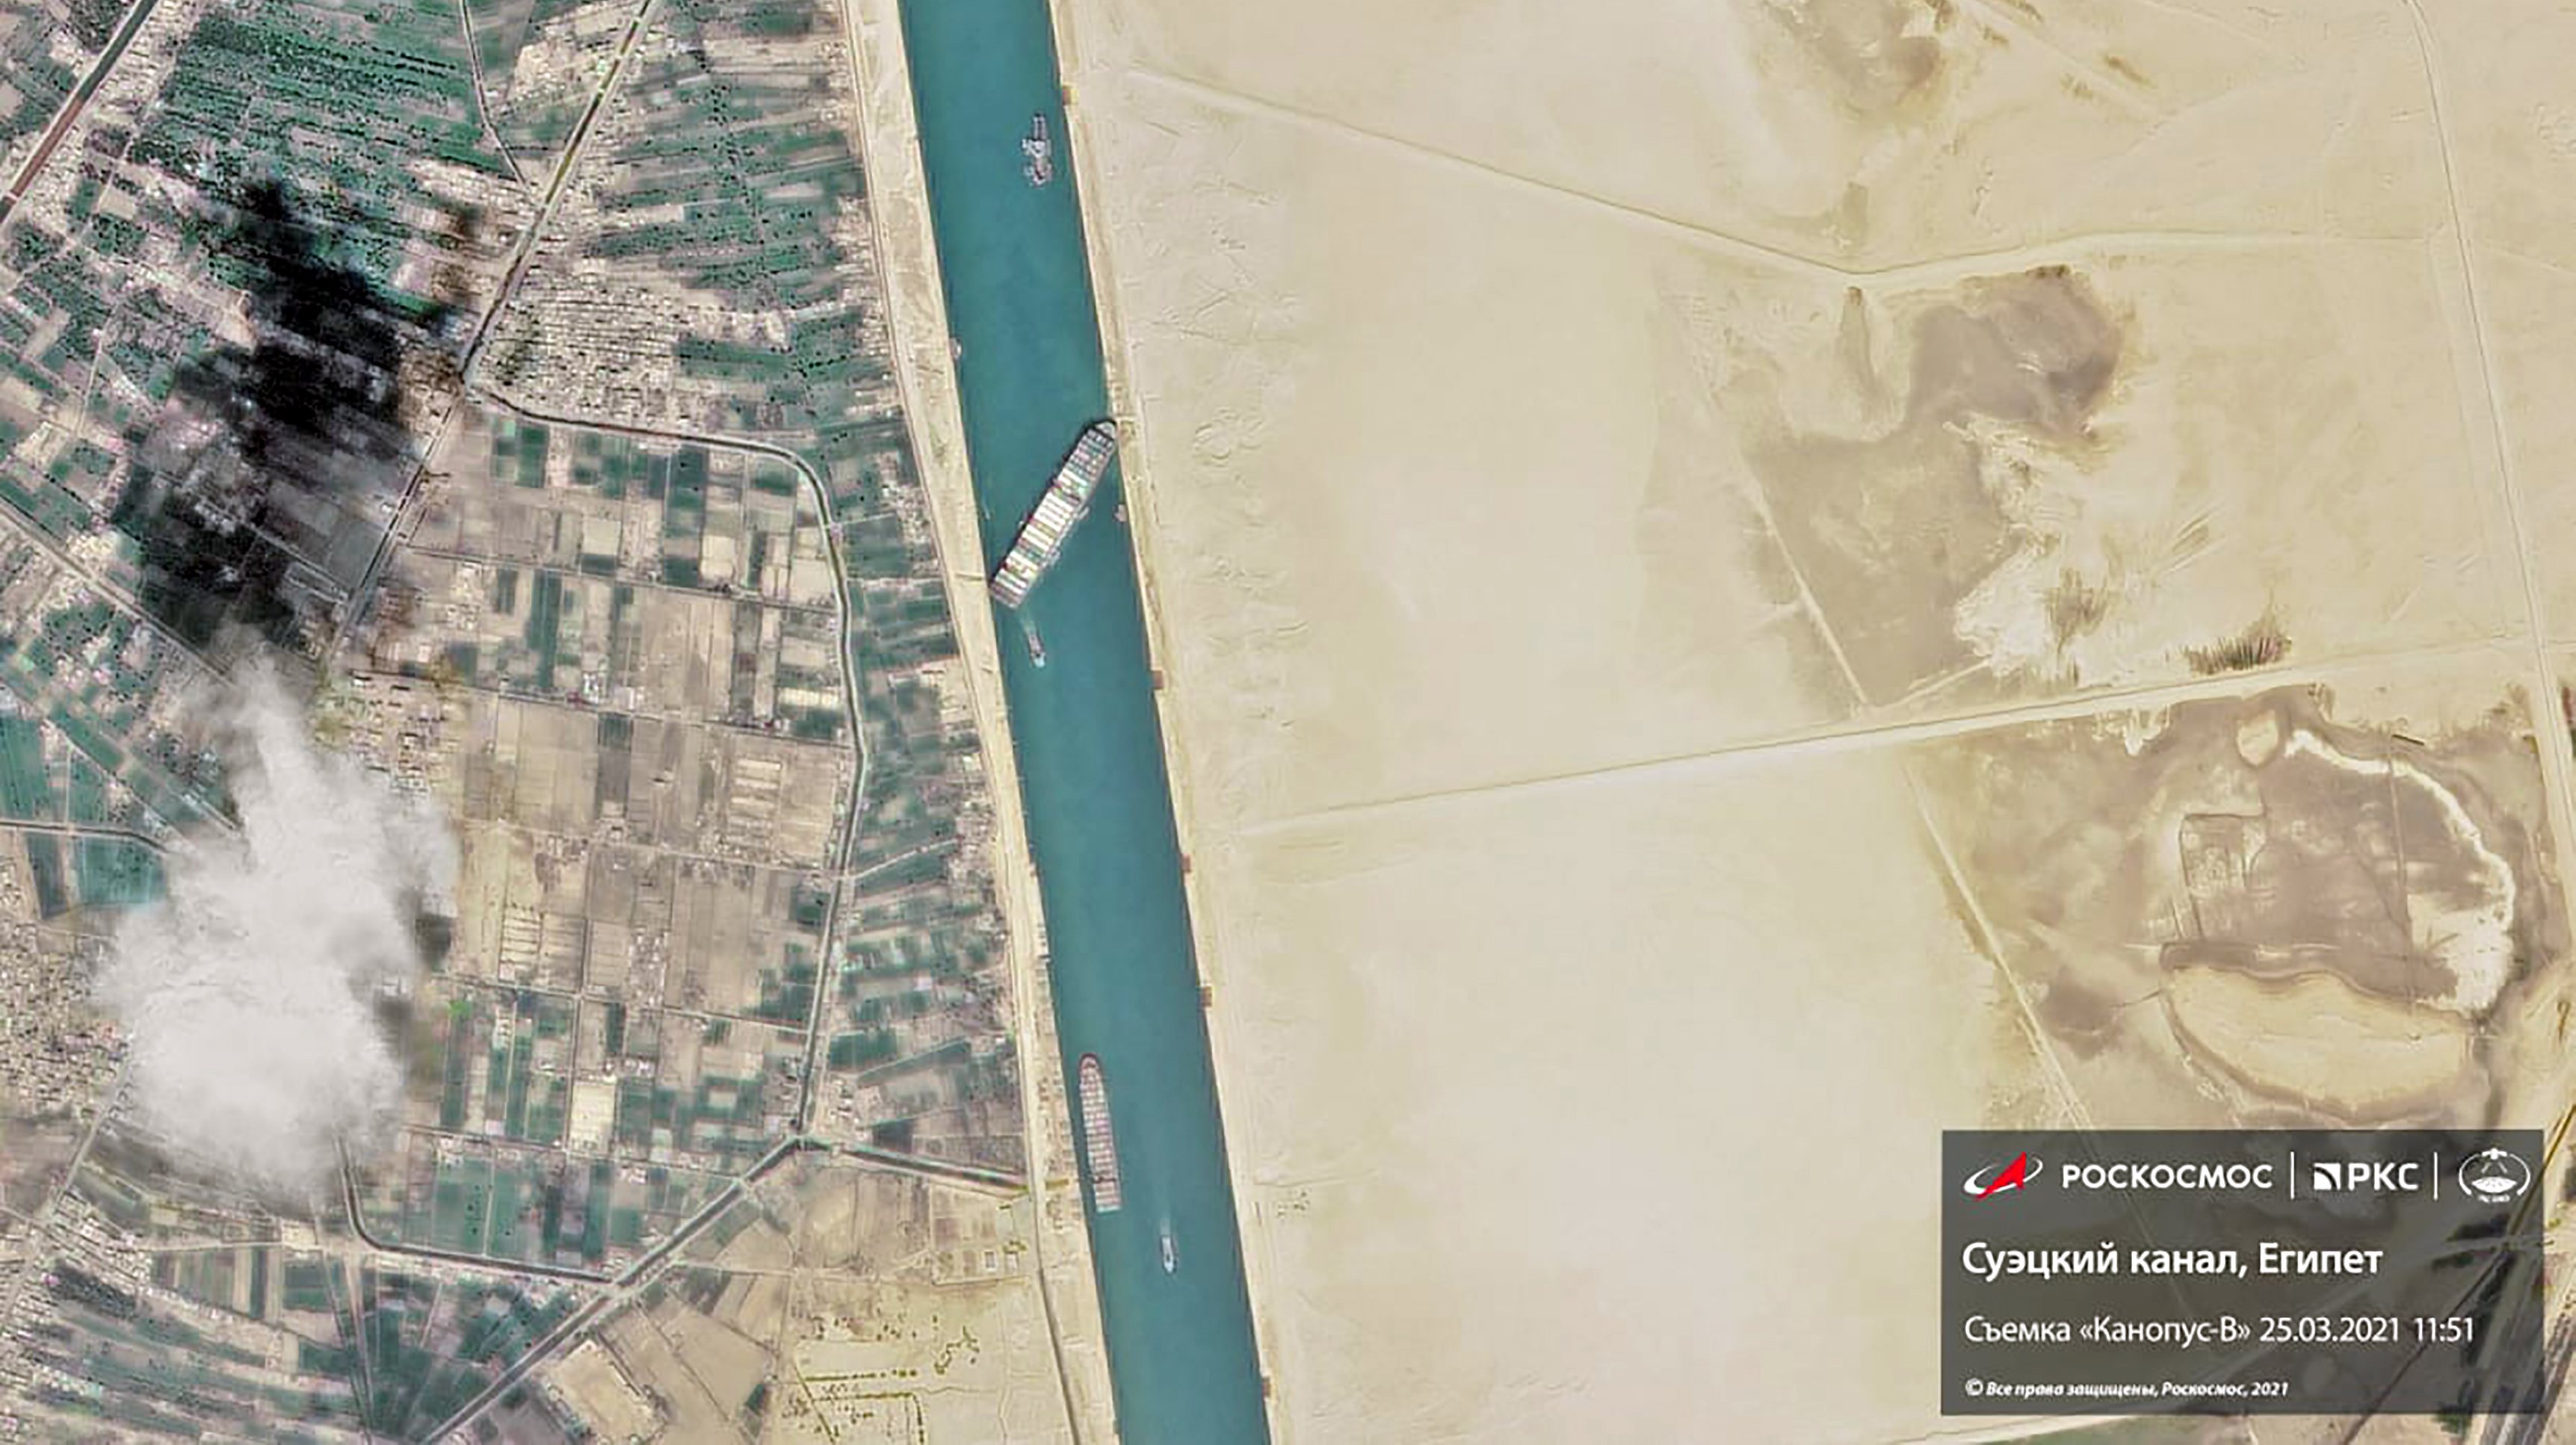 Grounded cointainer ship blocks Suez Canal in Egypt